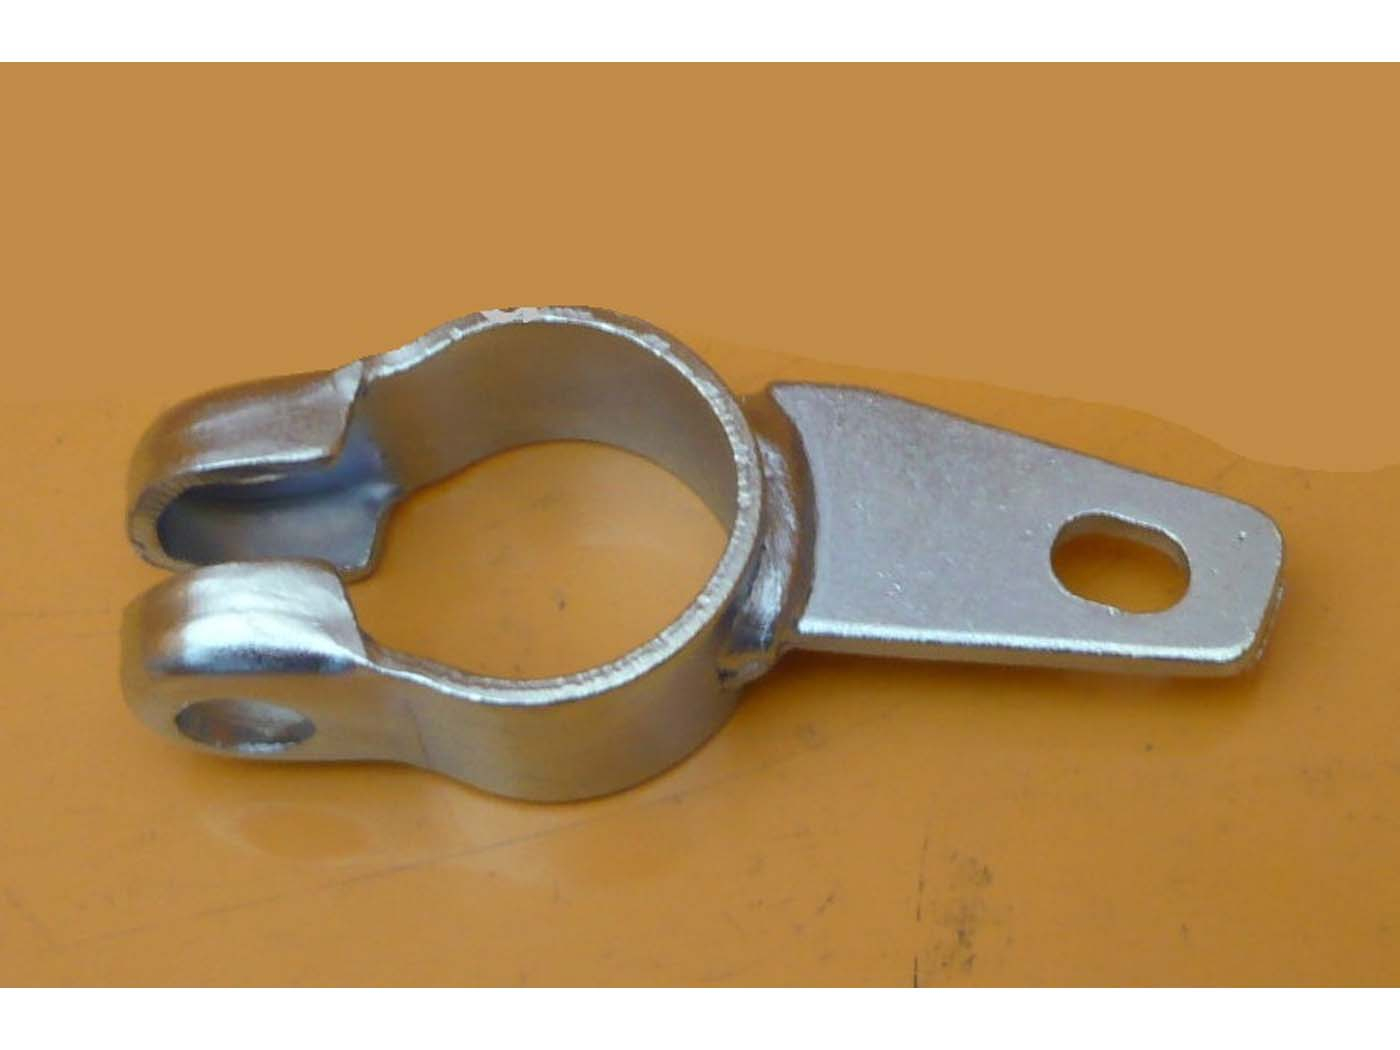 Exhaust Clamp For Puch MV VS MS 50, New